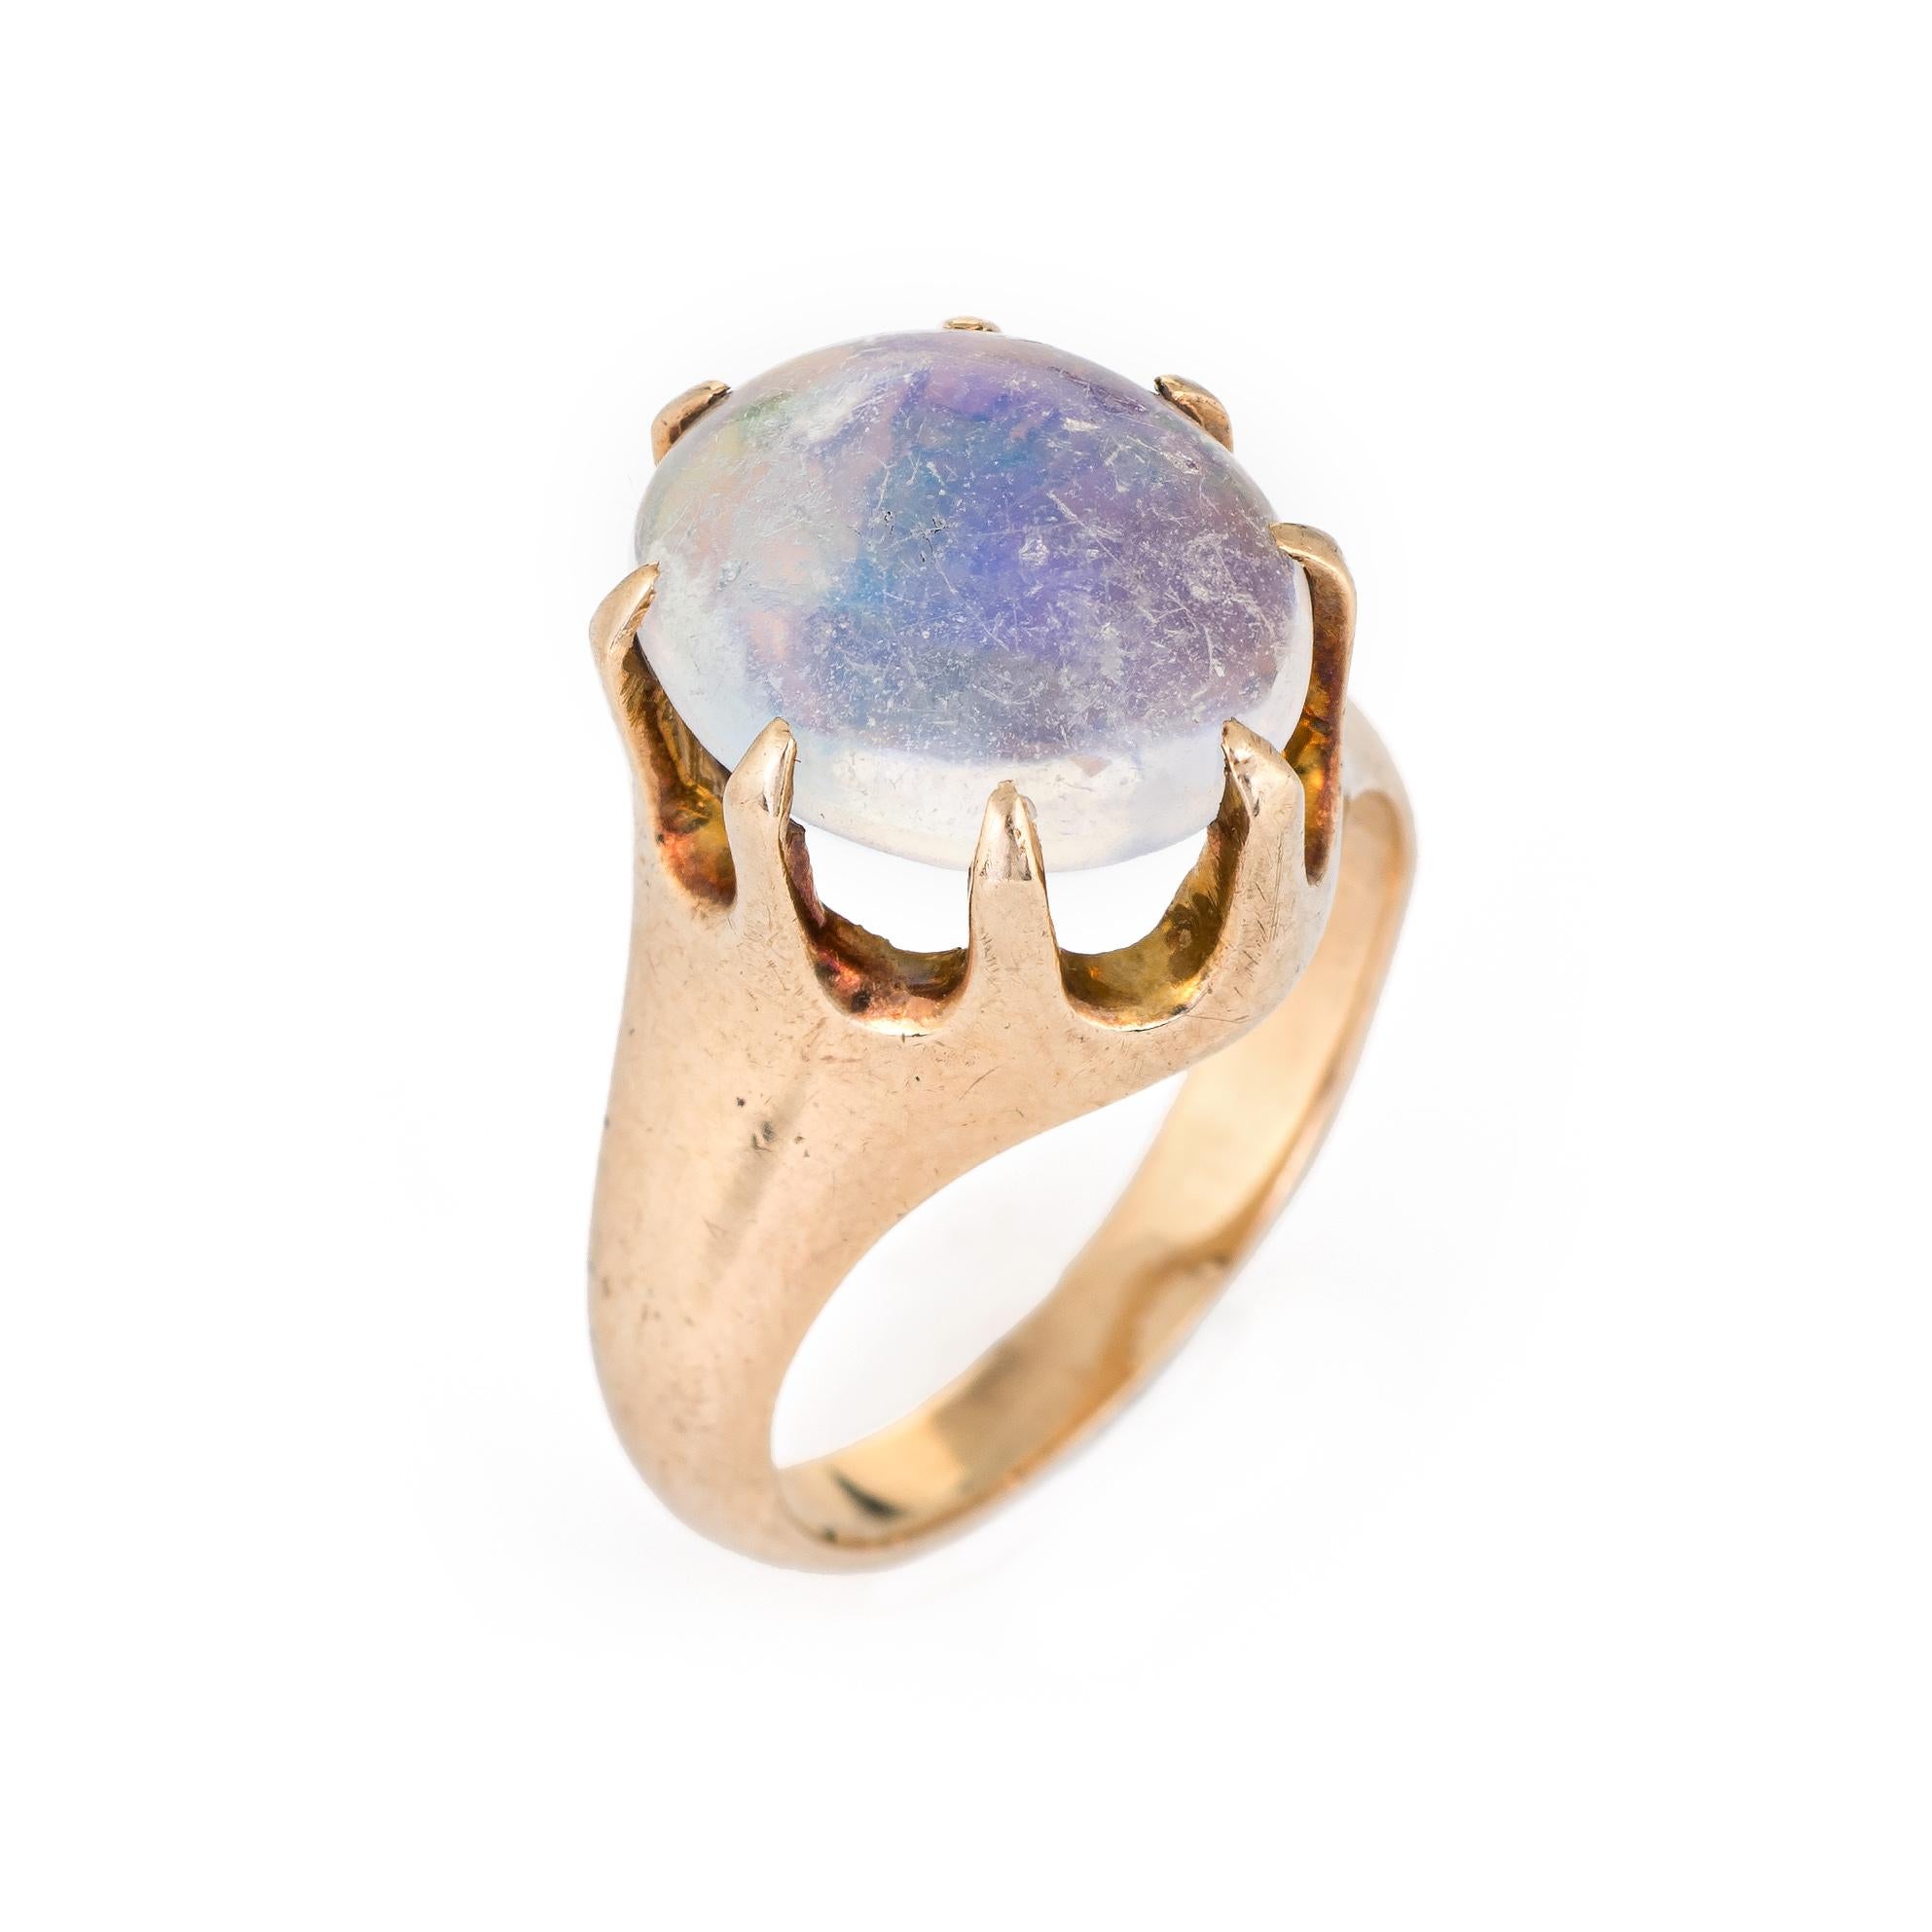 Finely detailed antique Victorian jelly opal ring (circa 1880s to 1900s) crafted in 10 karat yellow gold. 

Natural cabochon cut opal measures 12mm x 10mm (estimated at 4 carats). The opal is in excellent condition and free of cracks or chips (some